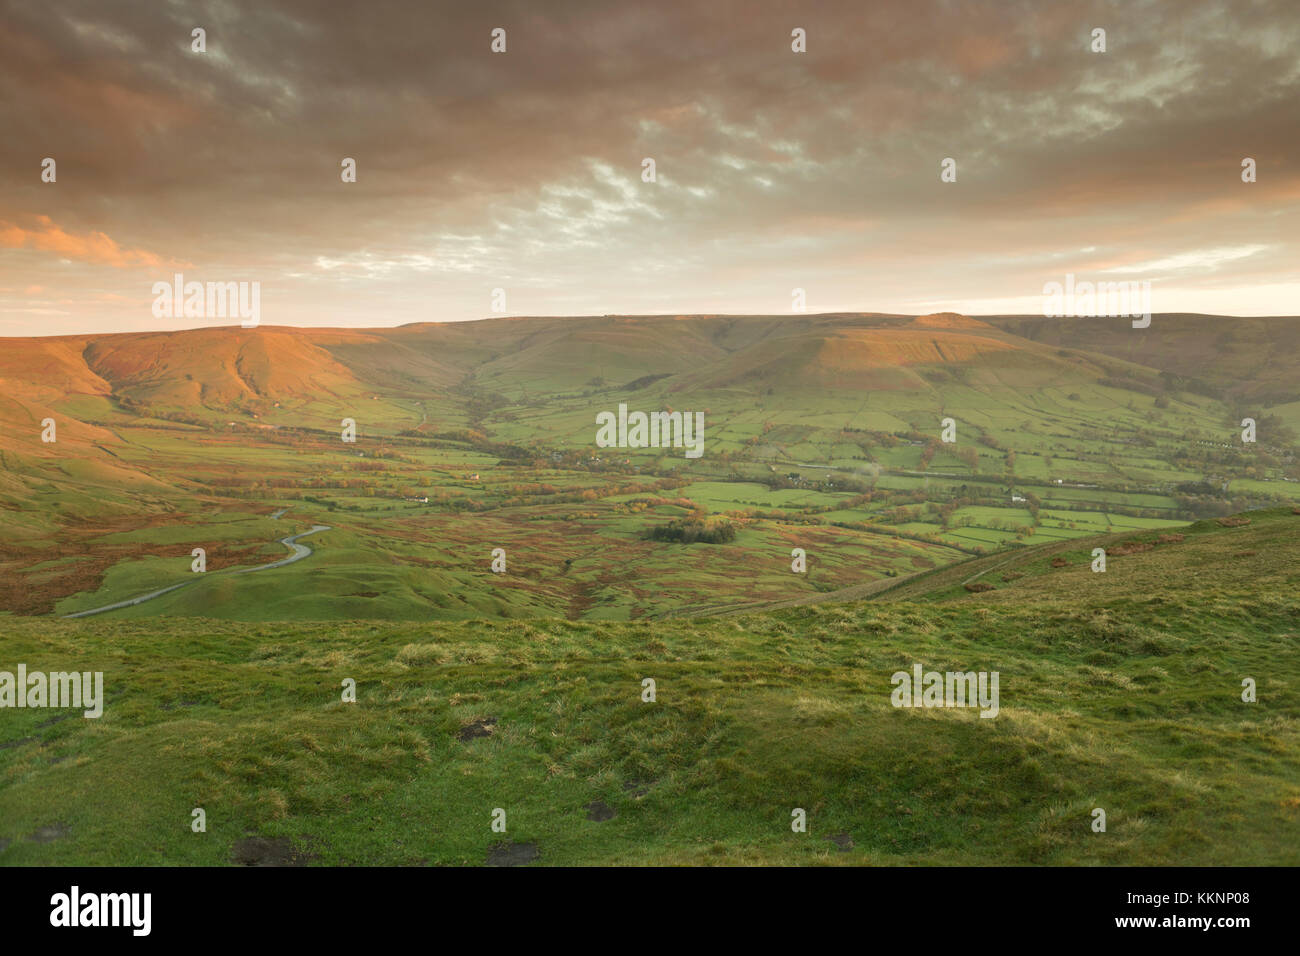 UK, Mam Tor, the view from Mam Tor towards Edale, at sunrise. Stock Photo